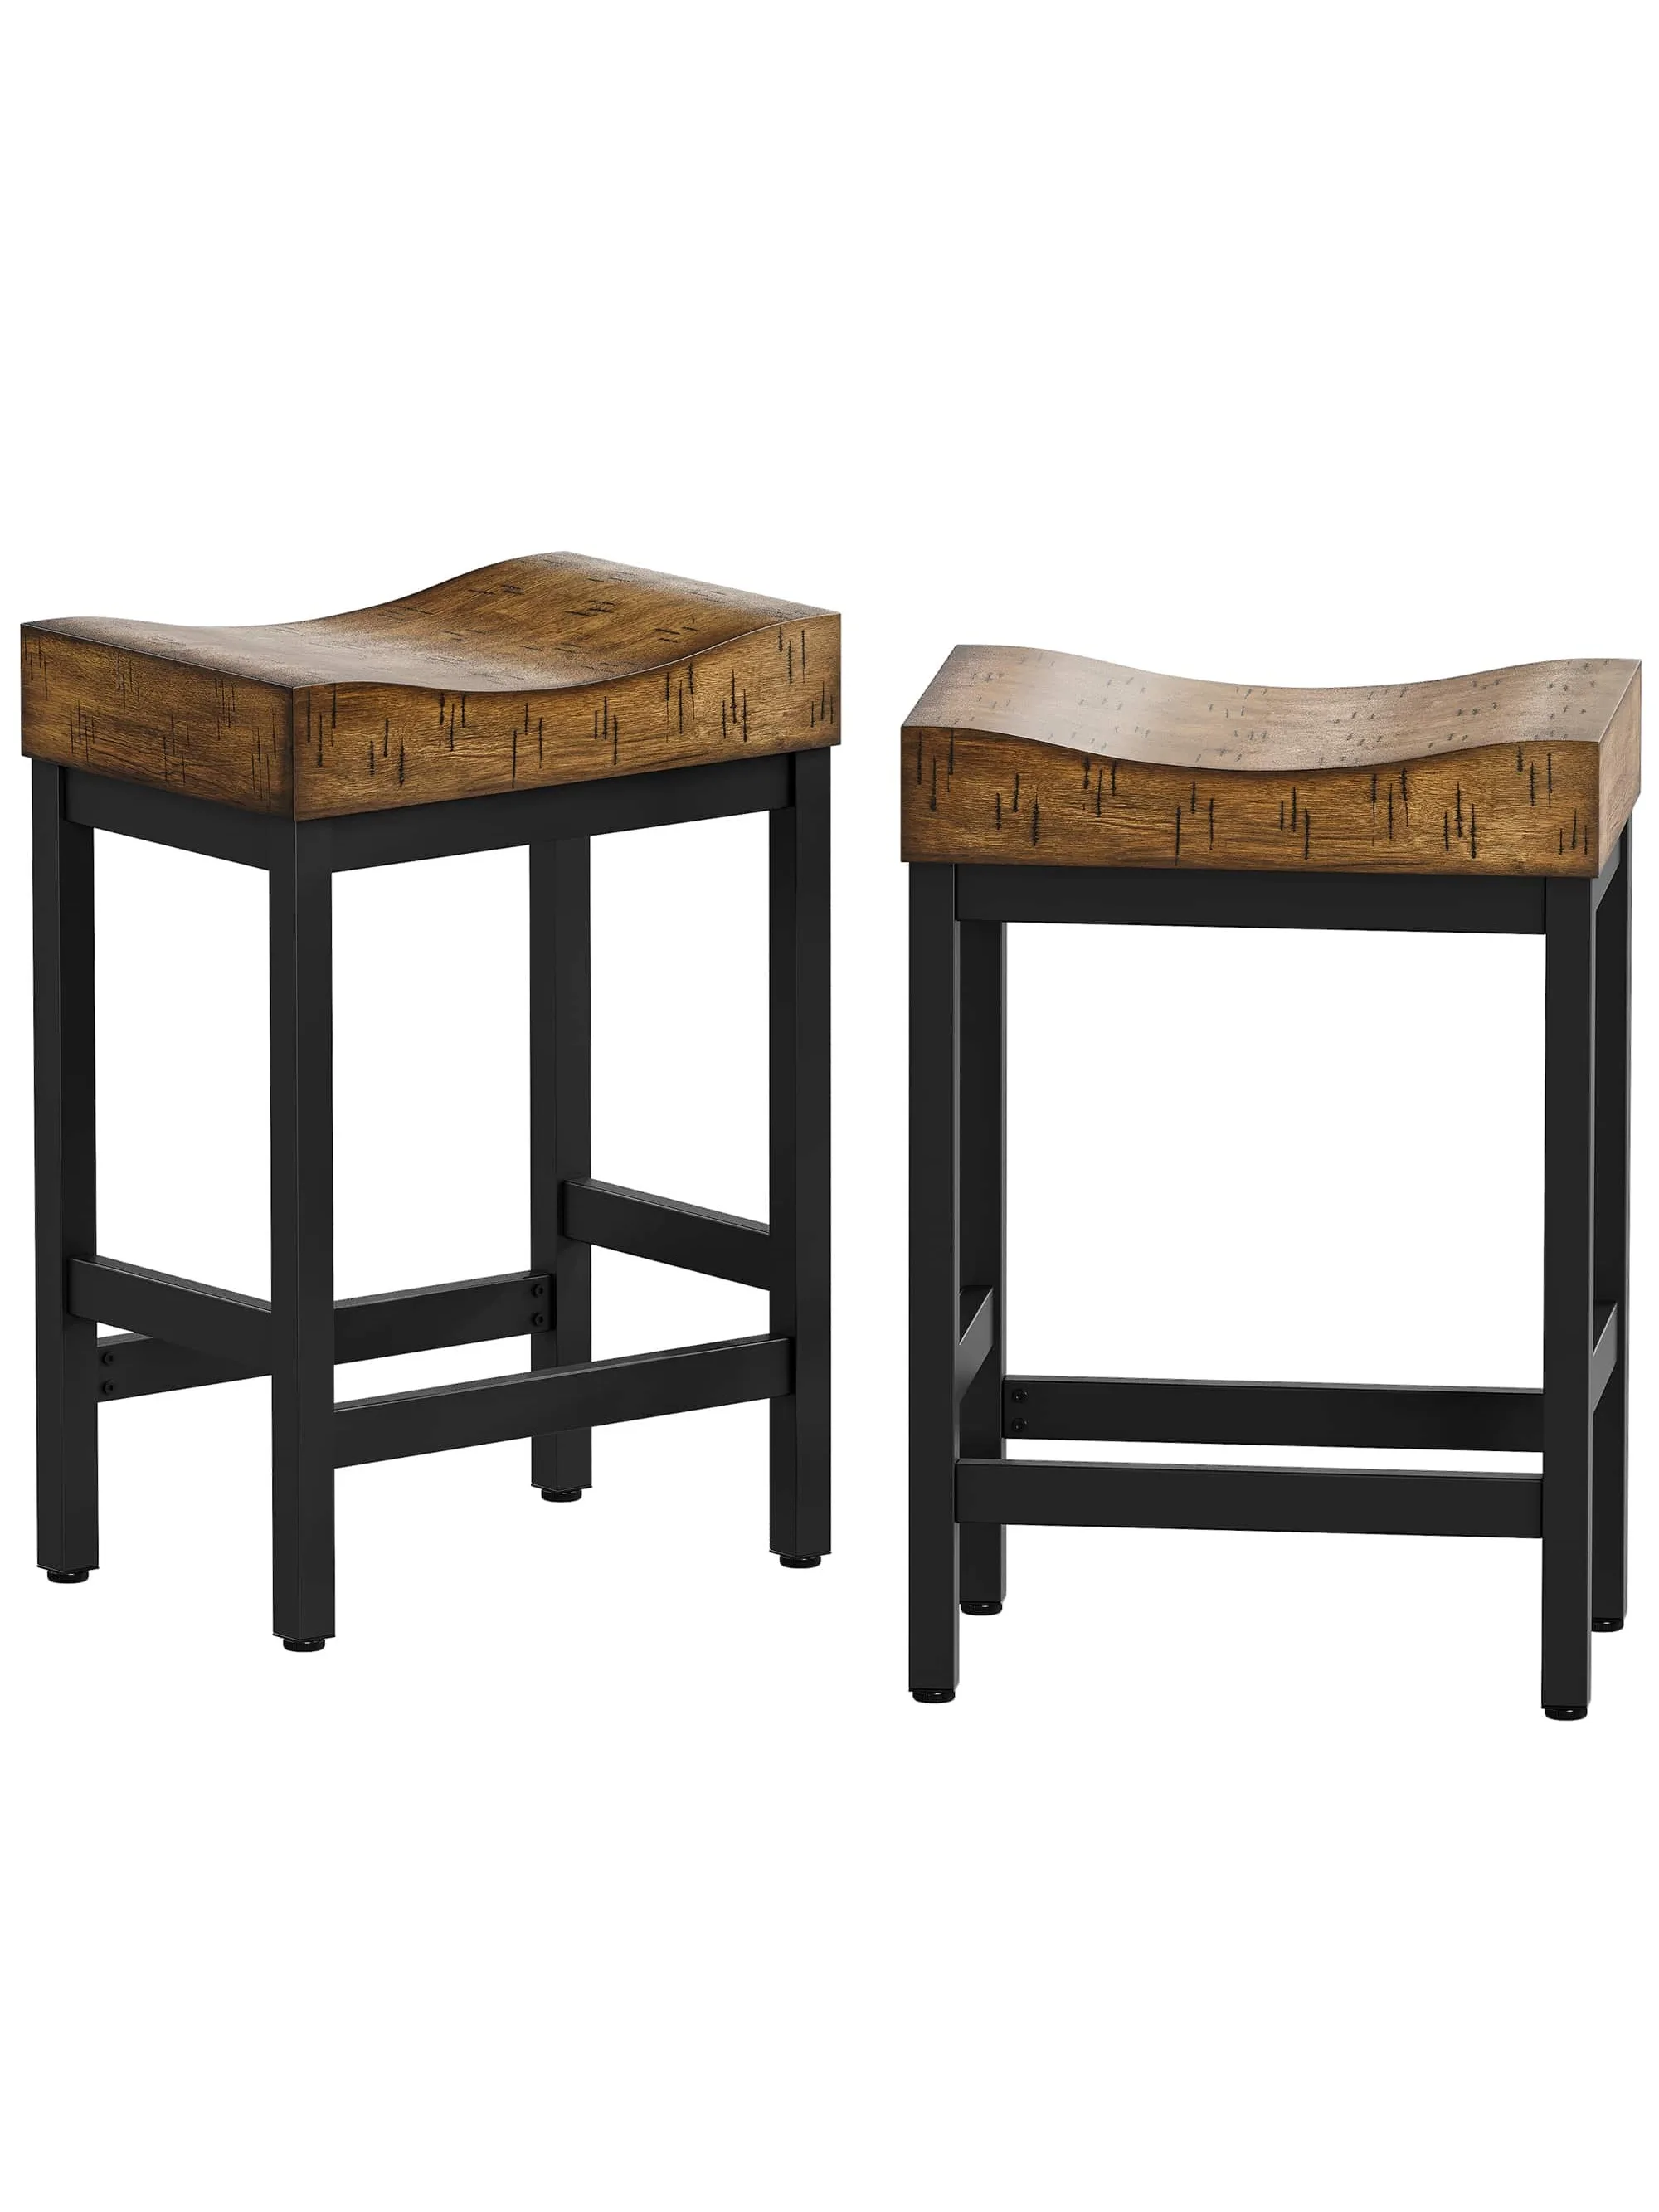 Bar Stools Set of 2, Counter Height Stools 25 Inch Saddle Stools, Wood Modern Kitchen Barstools with Metal Base images - 6